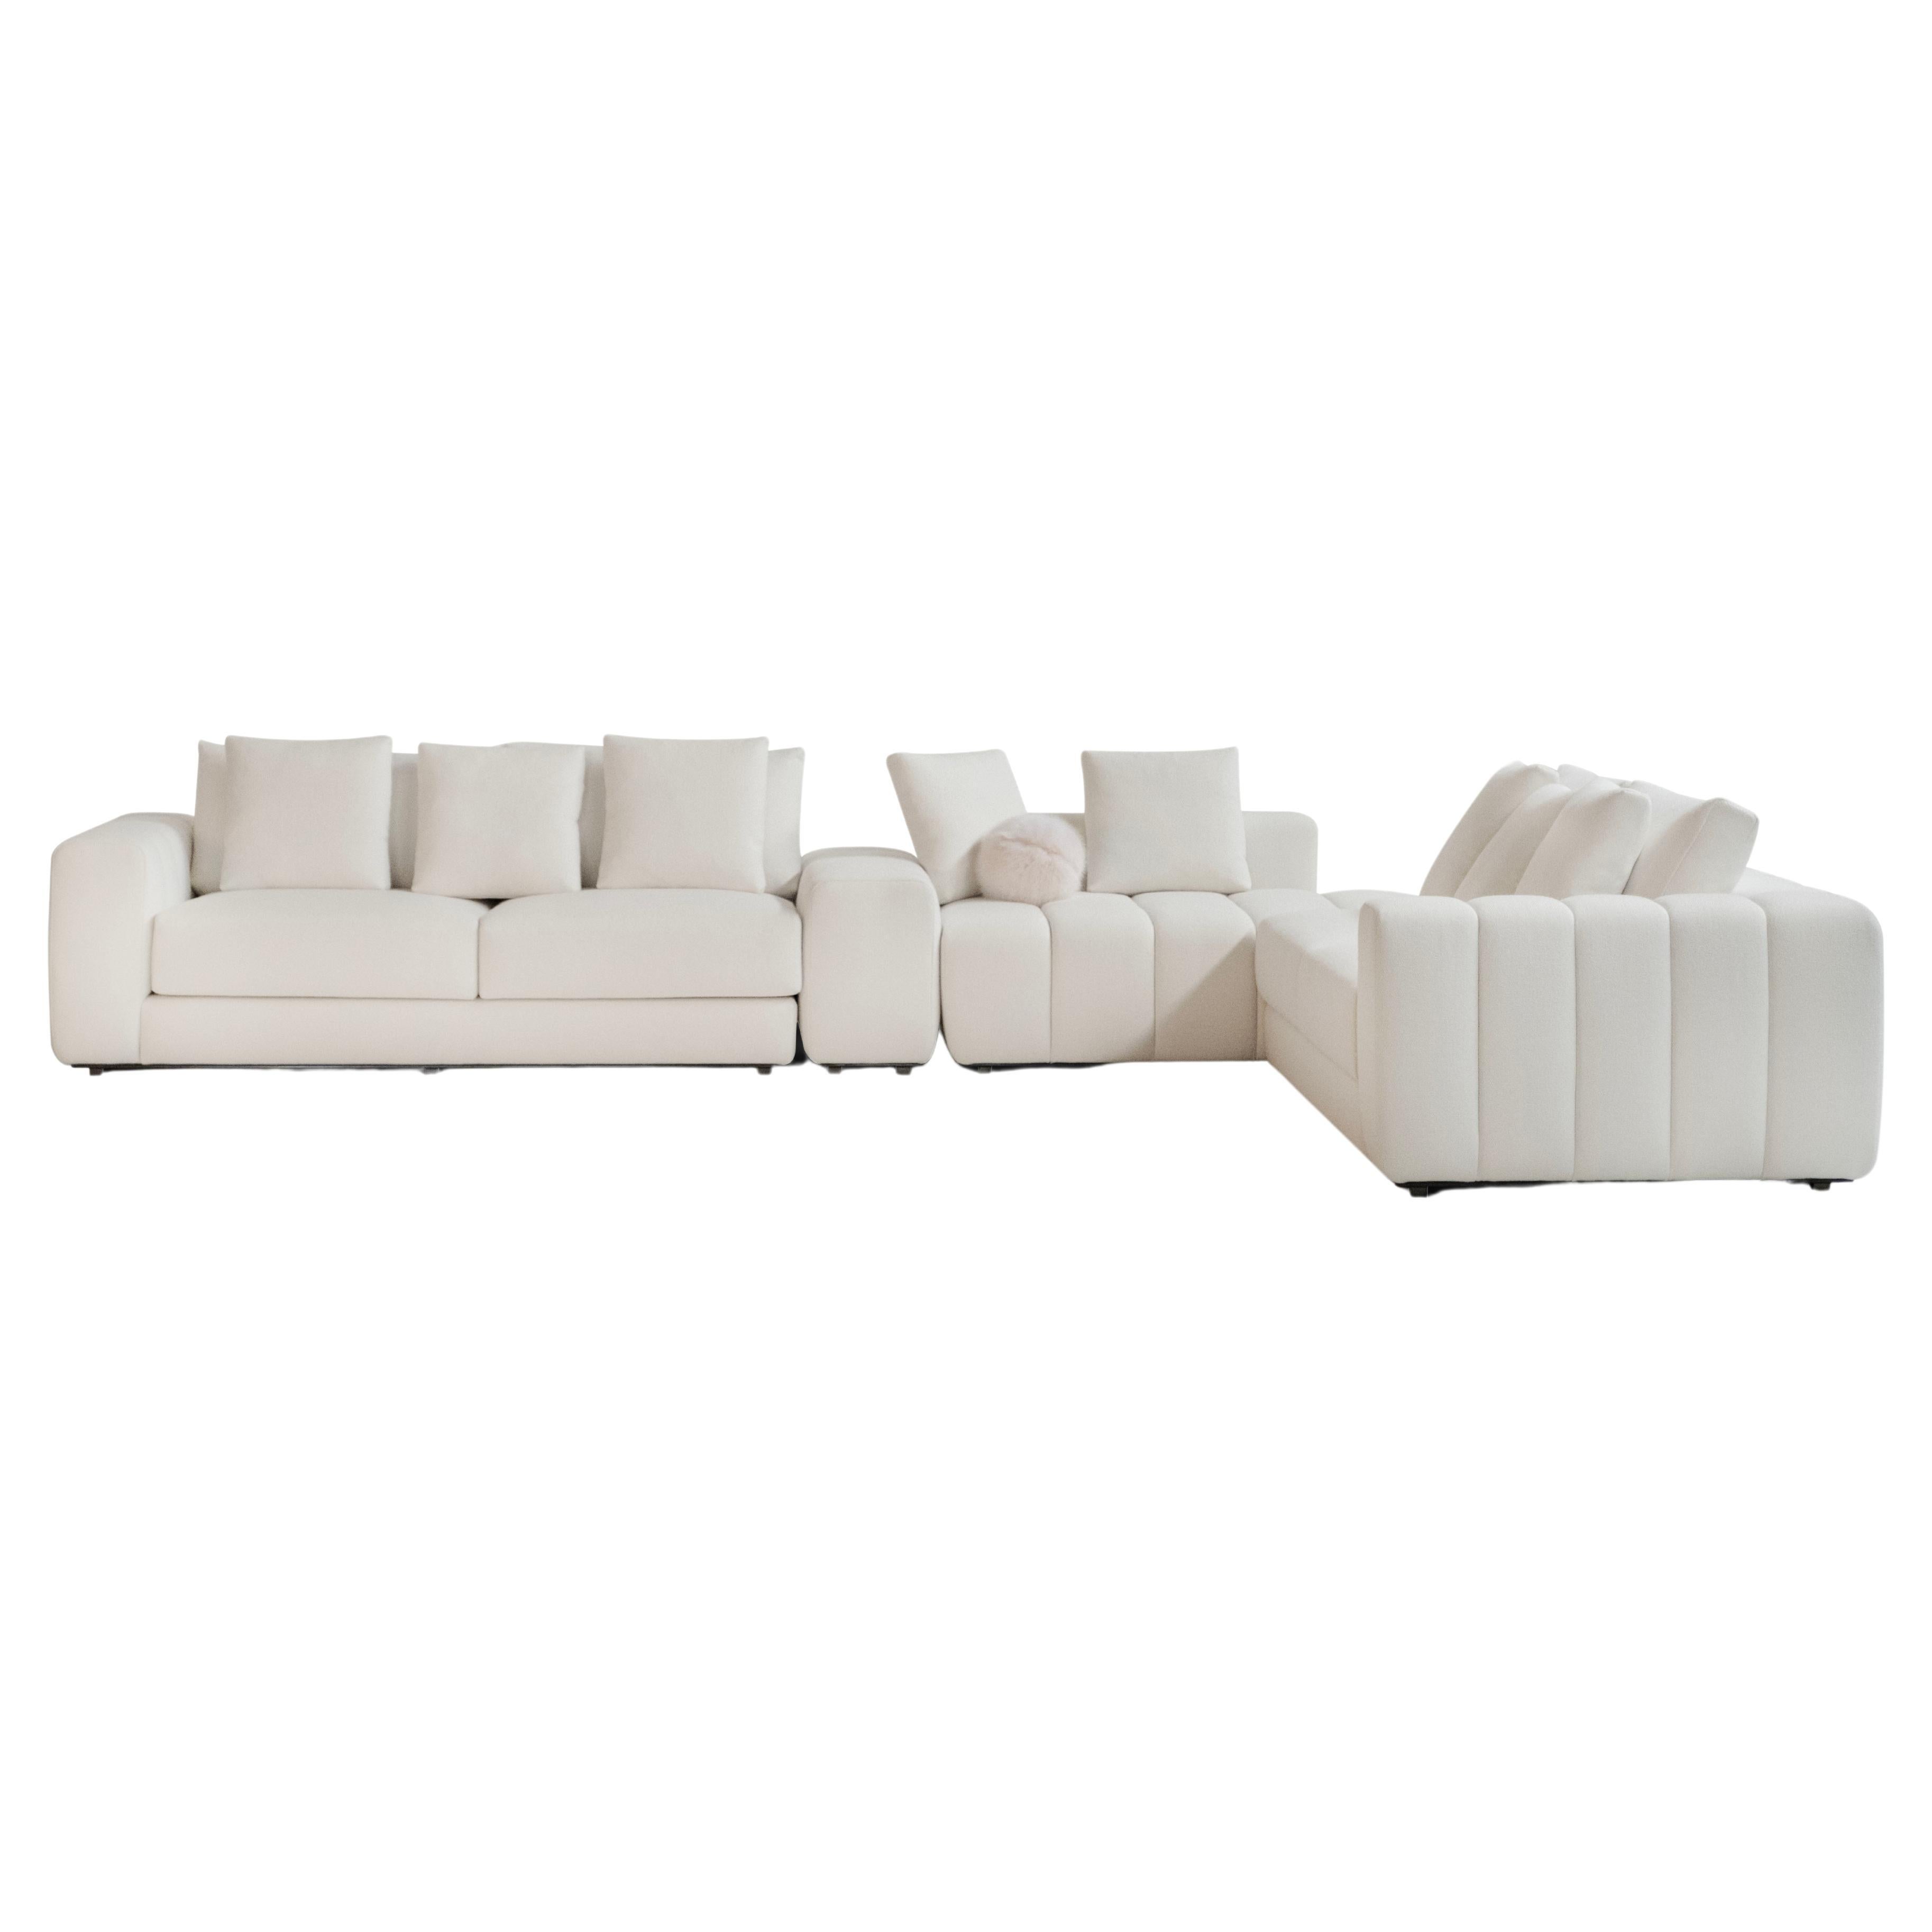 Hand-Crafted Modern Coast Mudular Sofa, Linen, Handmade in Portugal by Greenapple For Sale